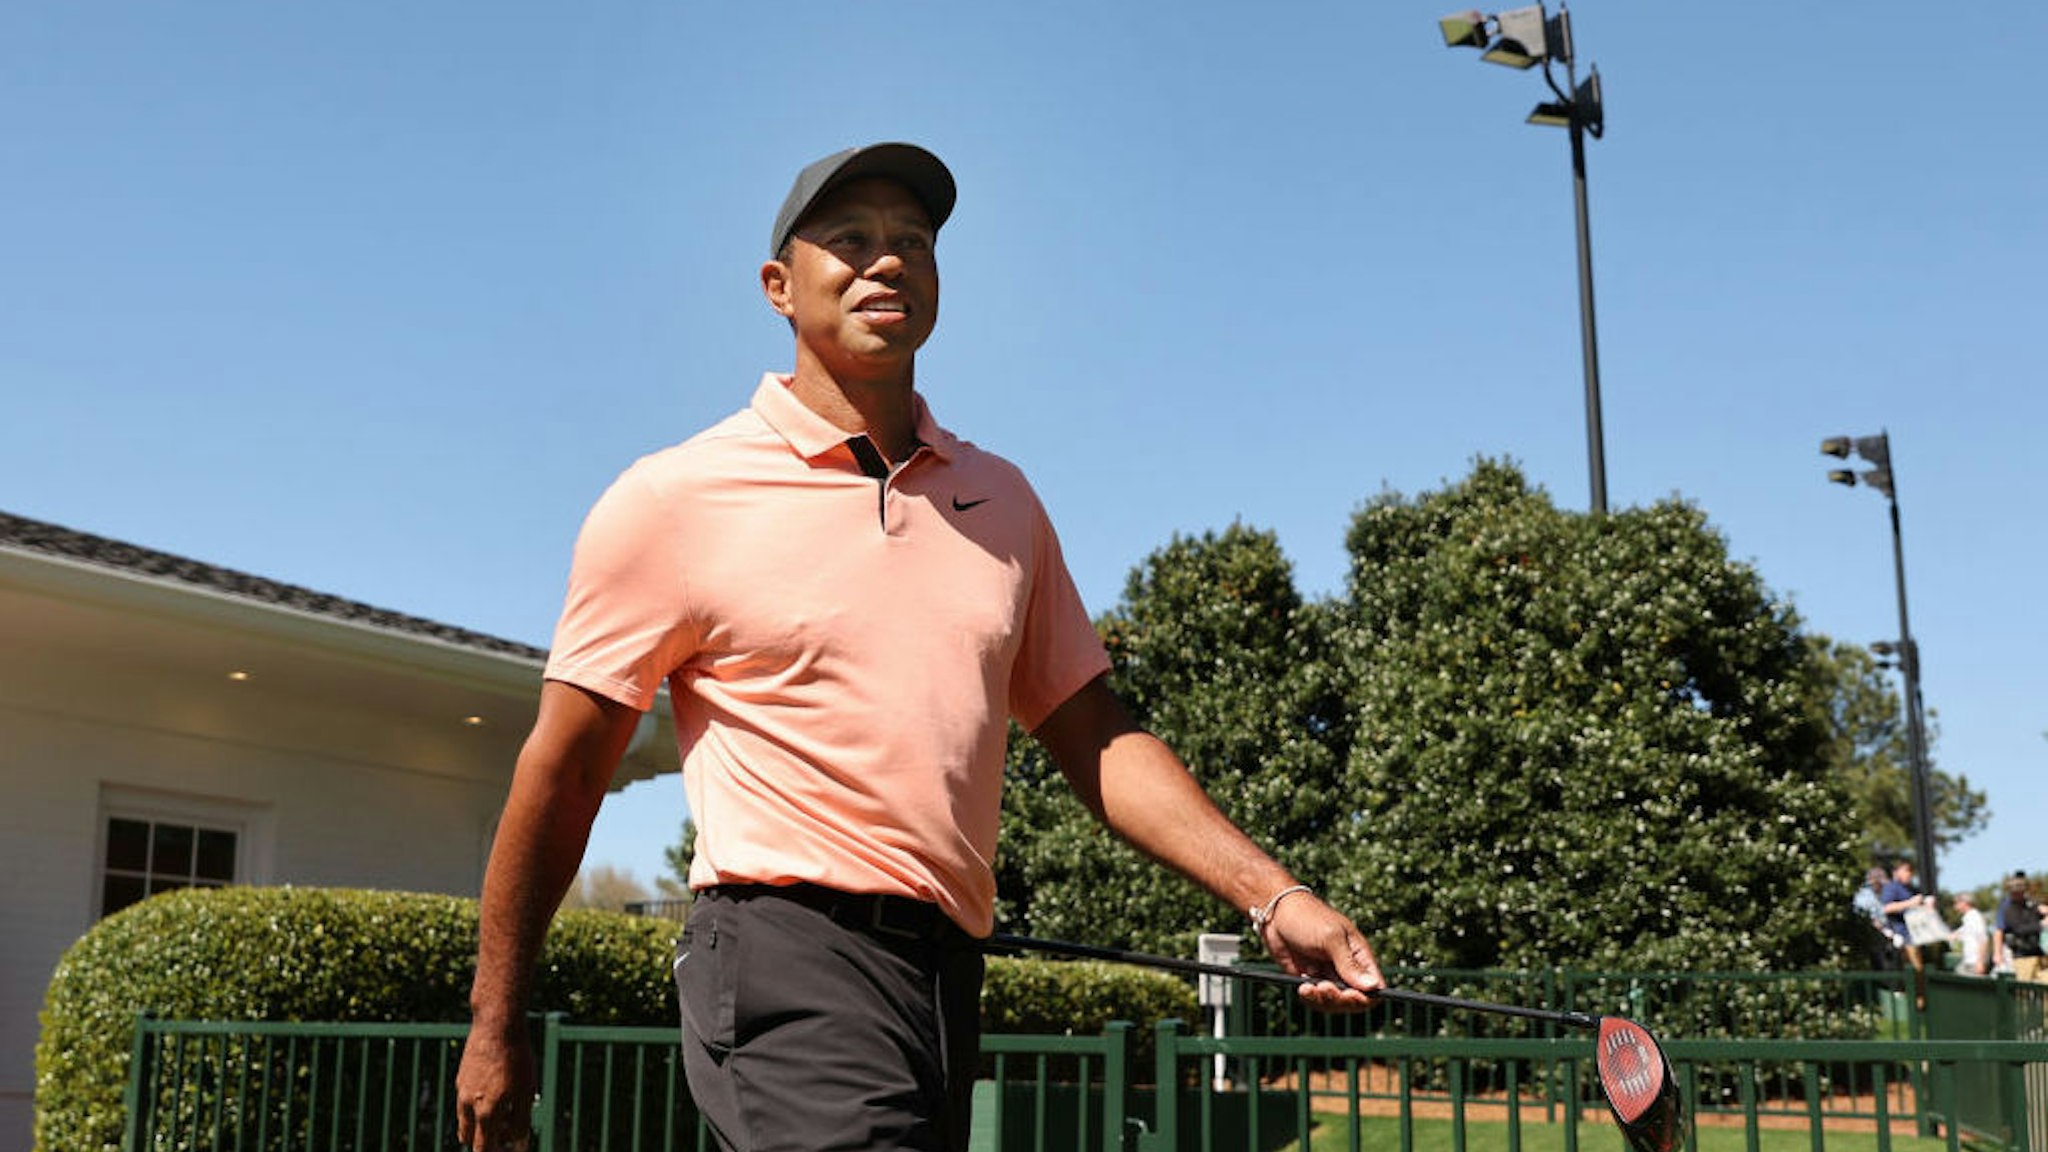 AUGUSTA, GEORGIA - APRIL 03: Tiger Woods of the United States walks from the practice area prior to the Masters at Augusta National Golf Club on April 03, 2022 in Augusta, Georgia. (Photo by Gregory Shamus/Getty Images)